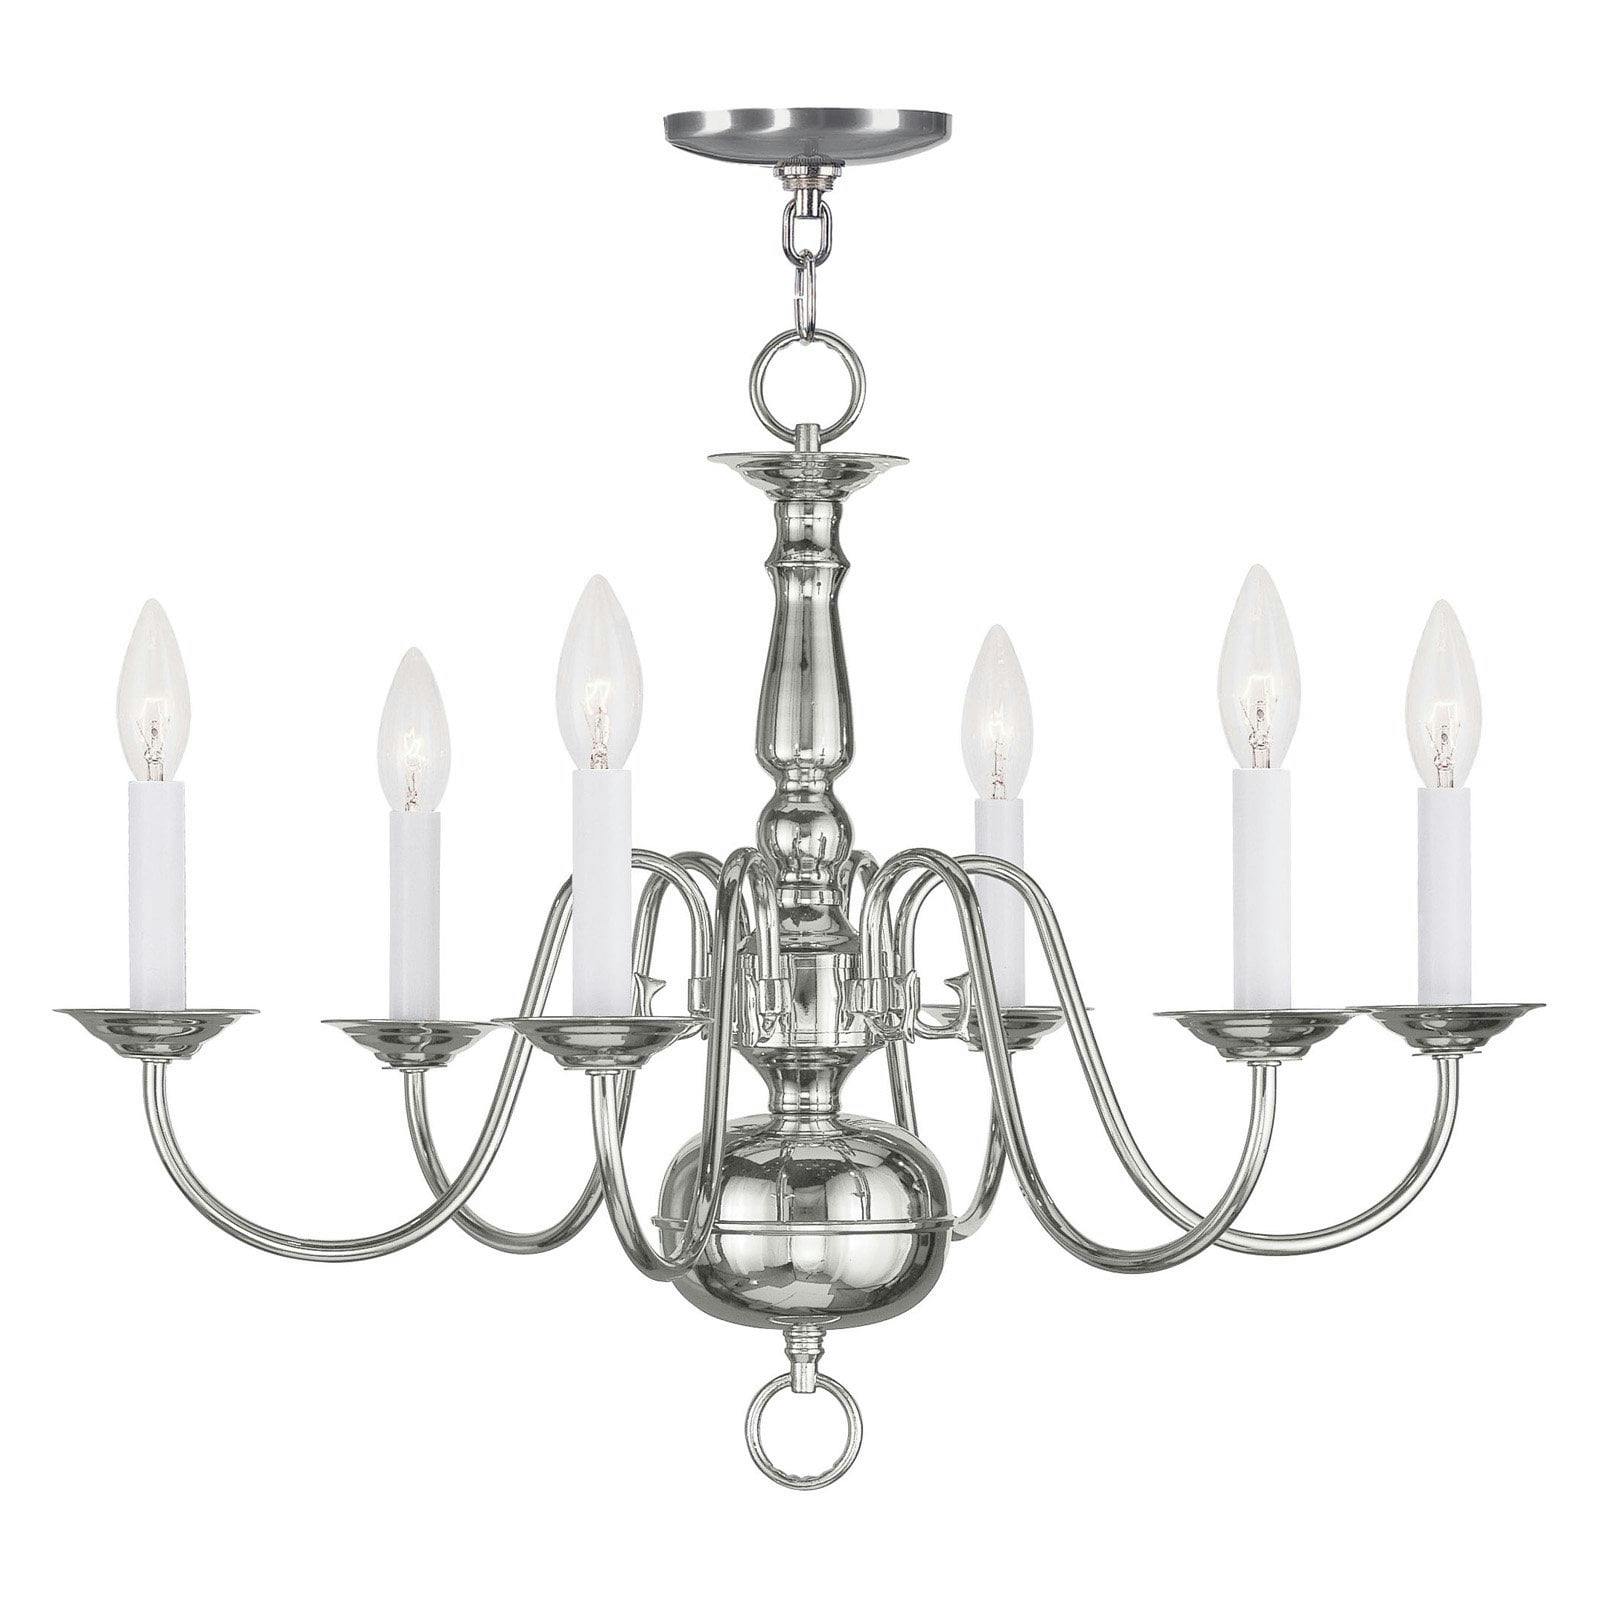 Williamsburgh Polished Nickel 6-Light Traditional Chain Chandelier